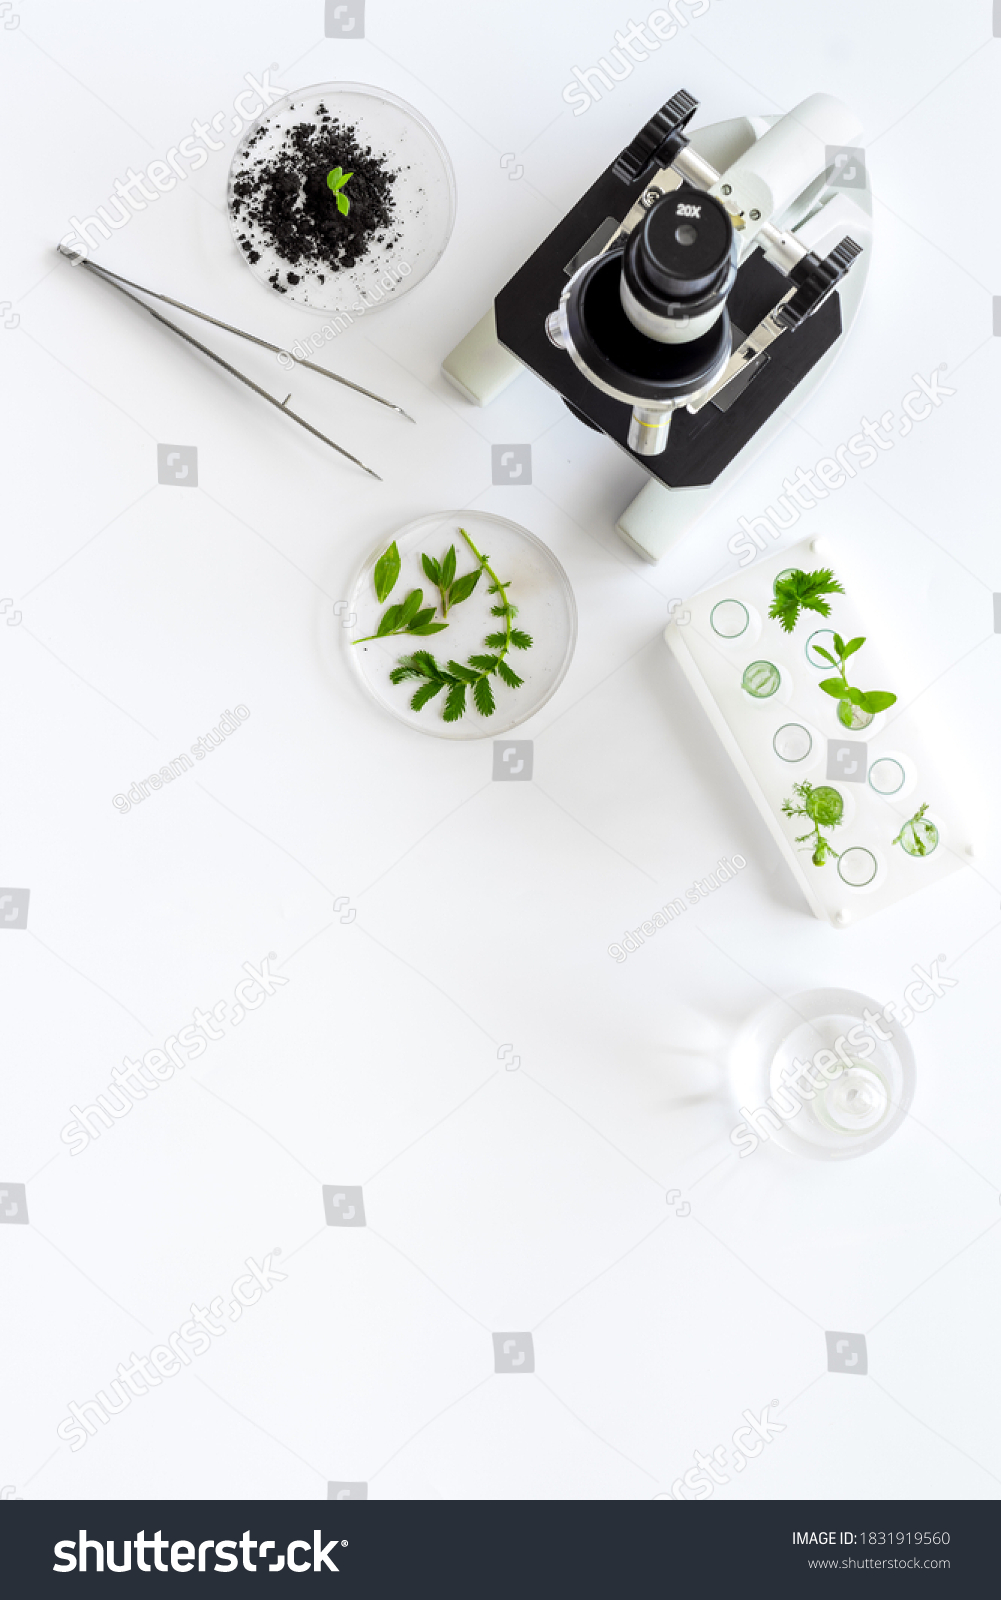 Plants with microscope in scientific laboratory. Top view #1831919560